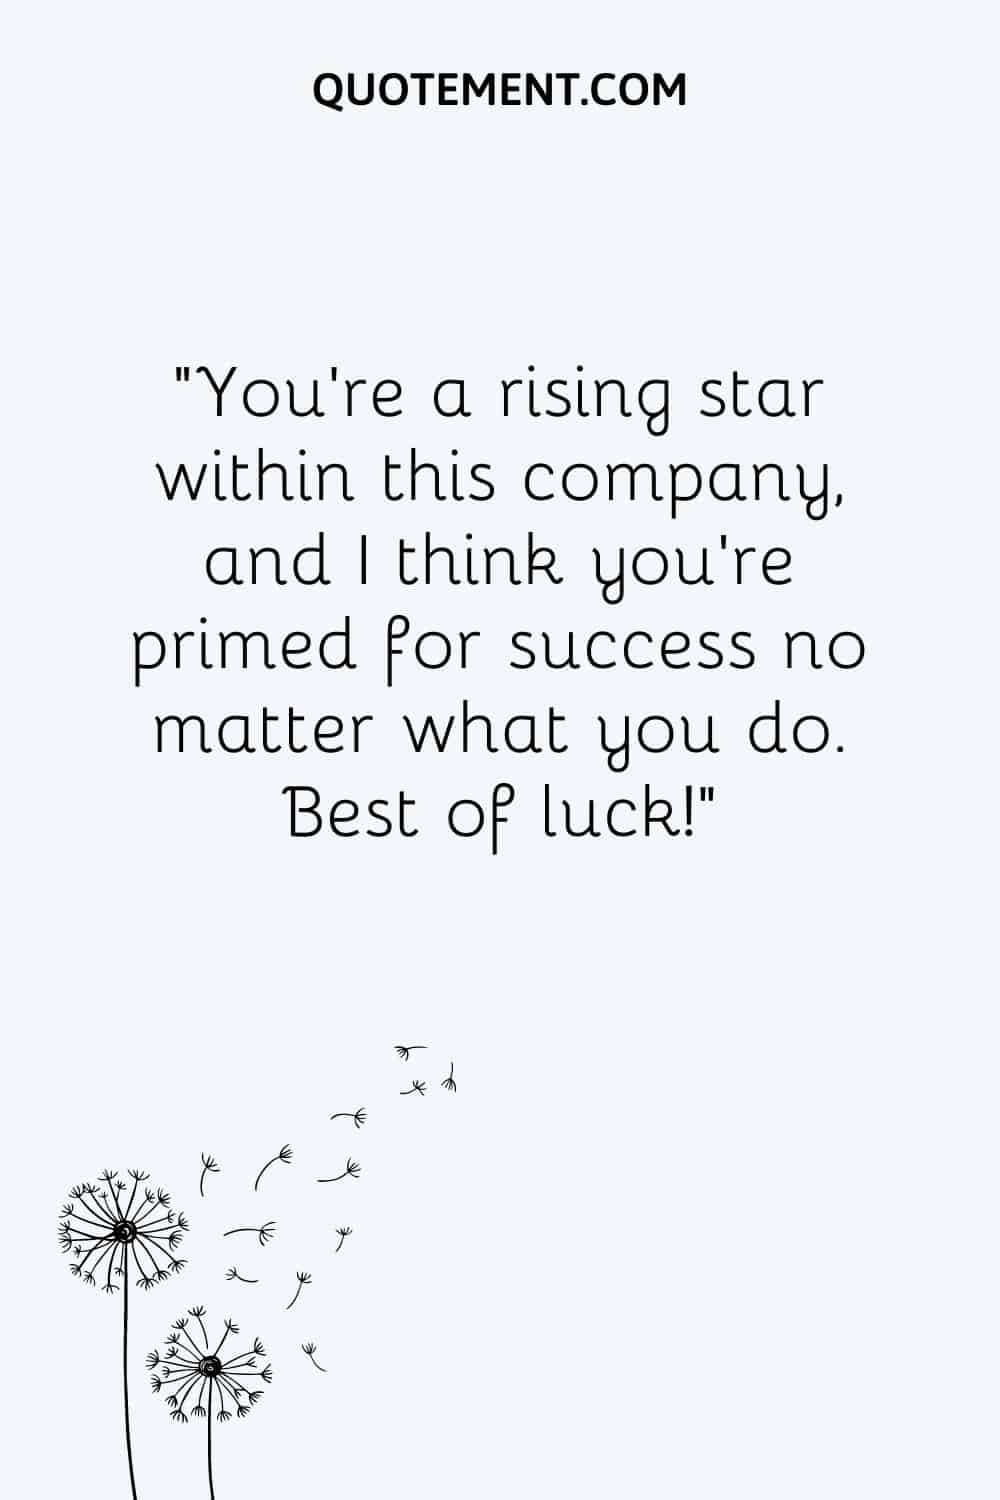 “You're a rising star within this company, and I think you're primed for success no matter what you do. Best of luck!”